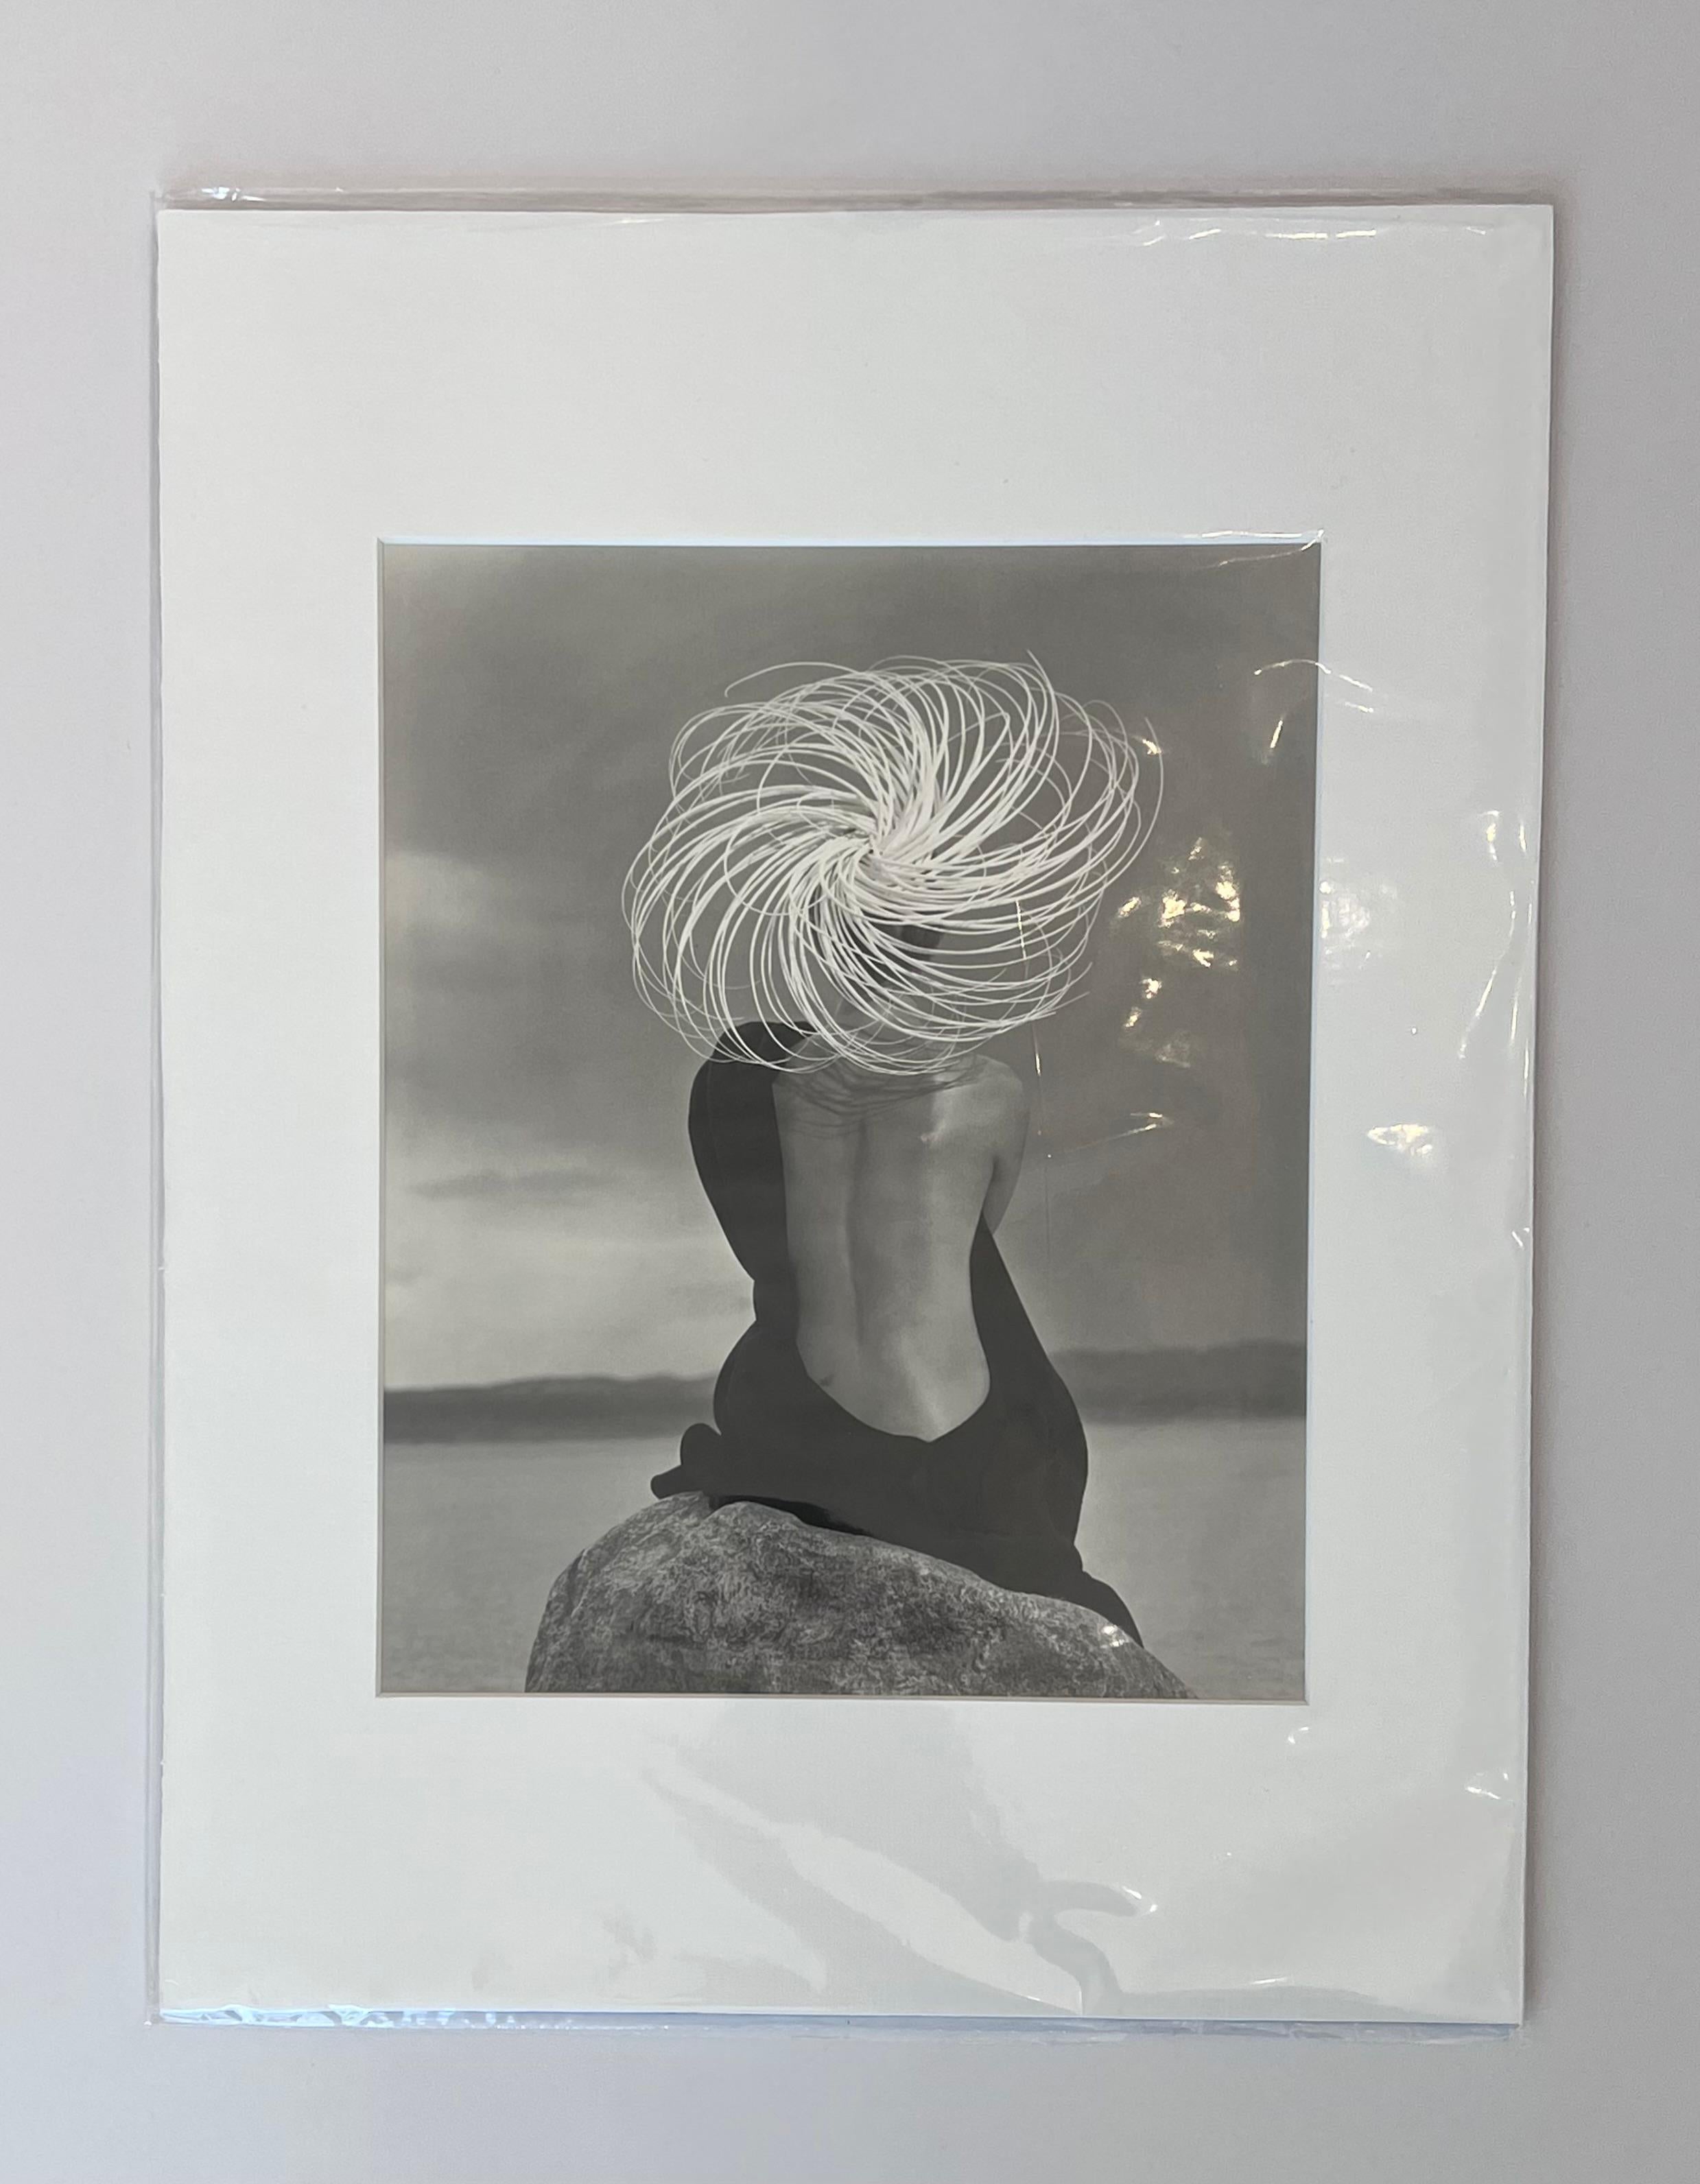 Female Fashion Zen Beach Hat 1999
by Herb Ritts

Authentic quadtone photo of a model sitting on the beach with a Zen beach hat, gazing into the horizon.

Unframed
Matted
Overall size : 12 x 16